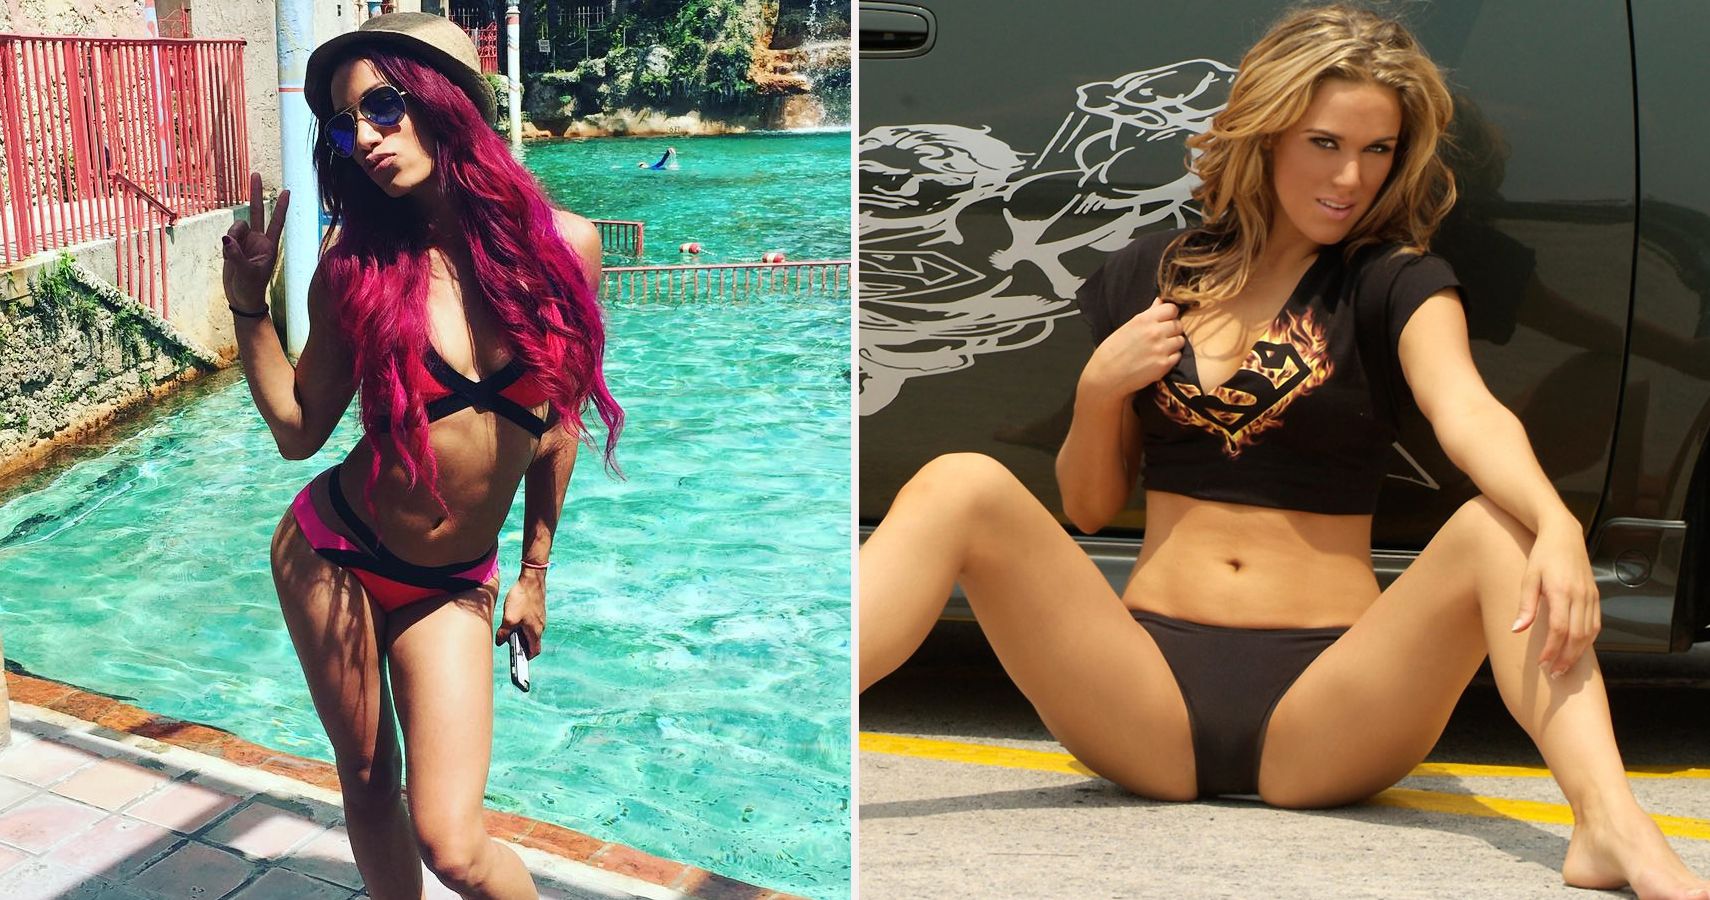 8 Pictures of Sasha Banks & 8 Pictures of Lana: Who's Hotter?